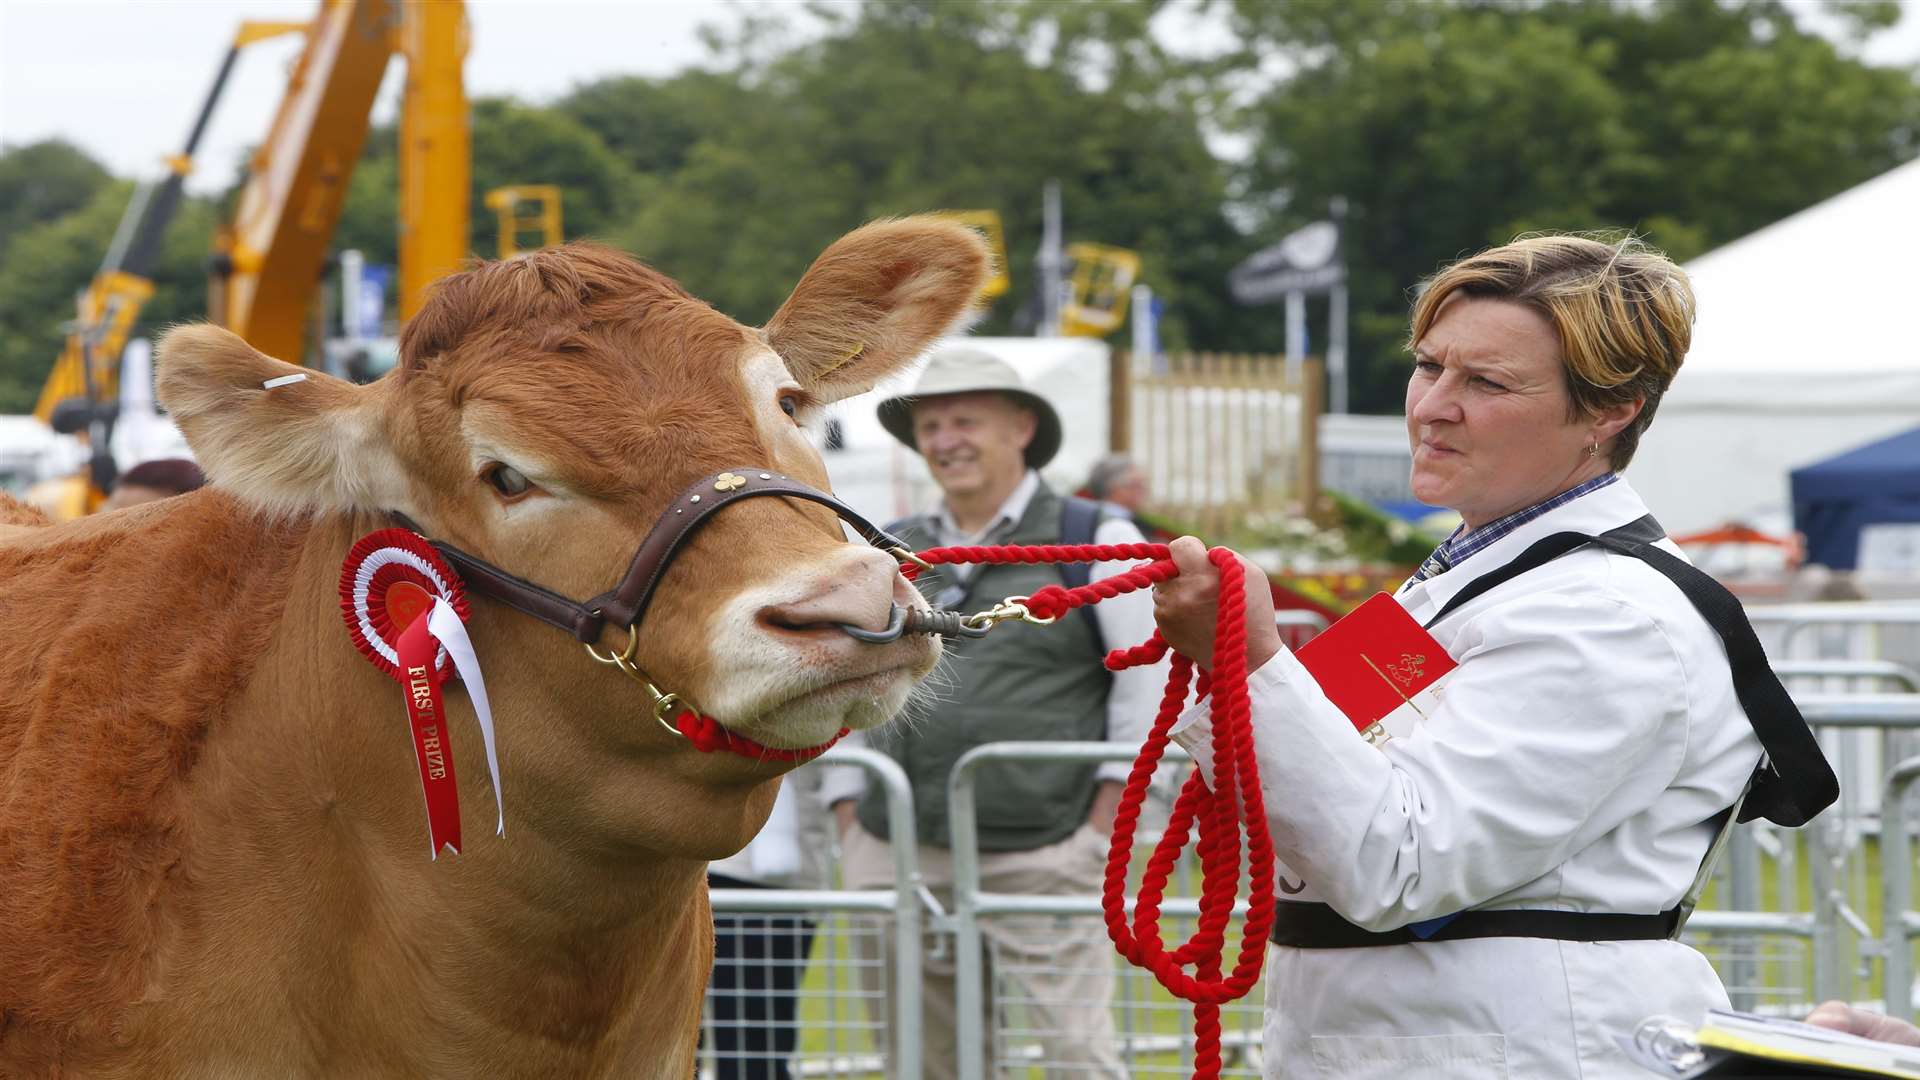 The Kent County Show is an annual showcase for livestock Picture: Andy Jones